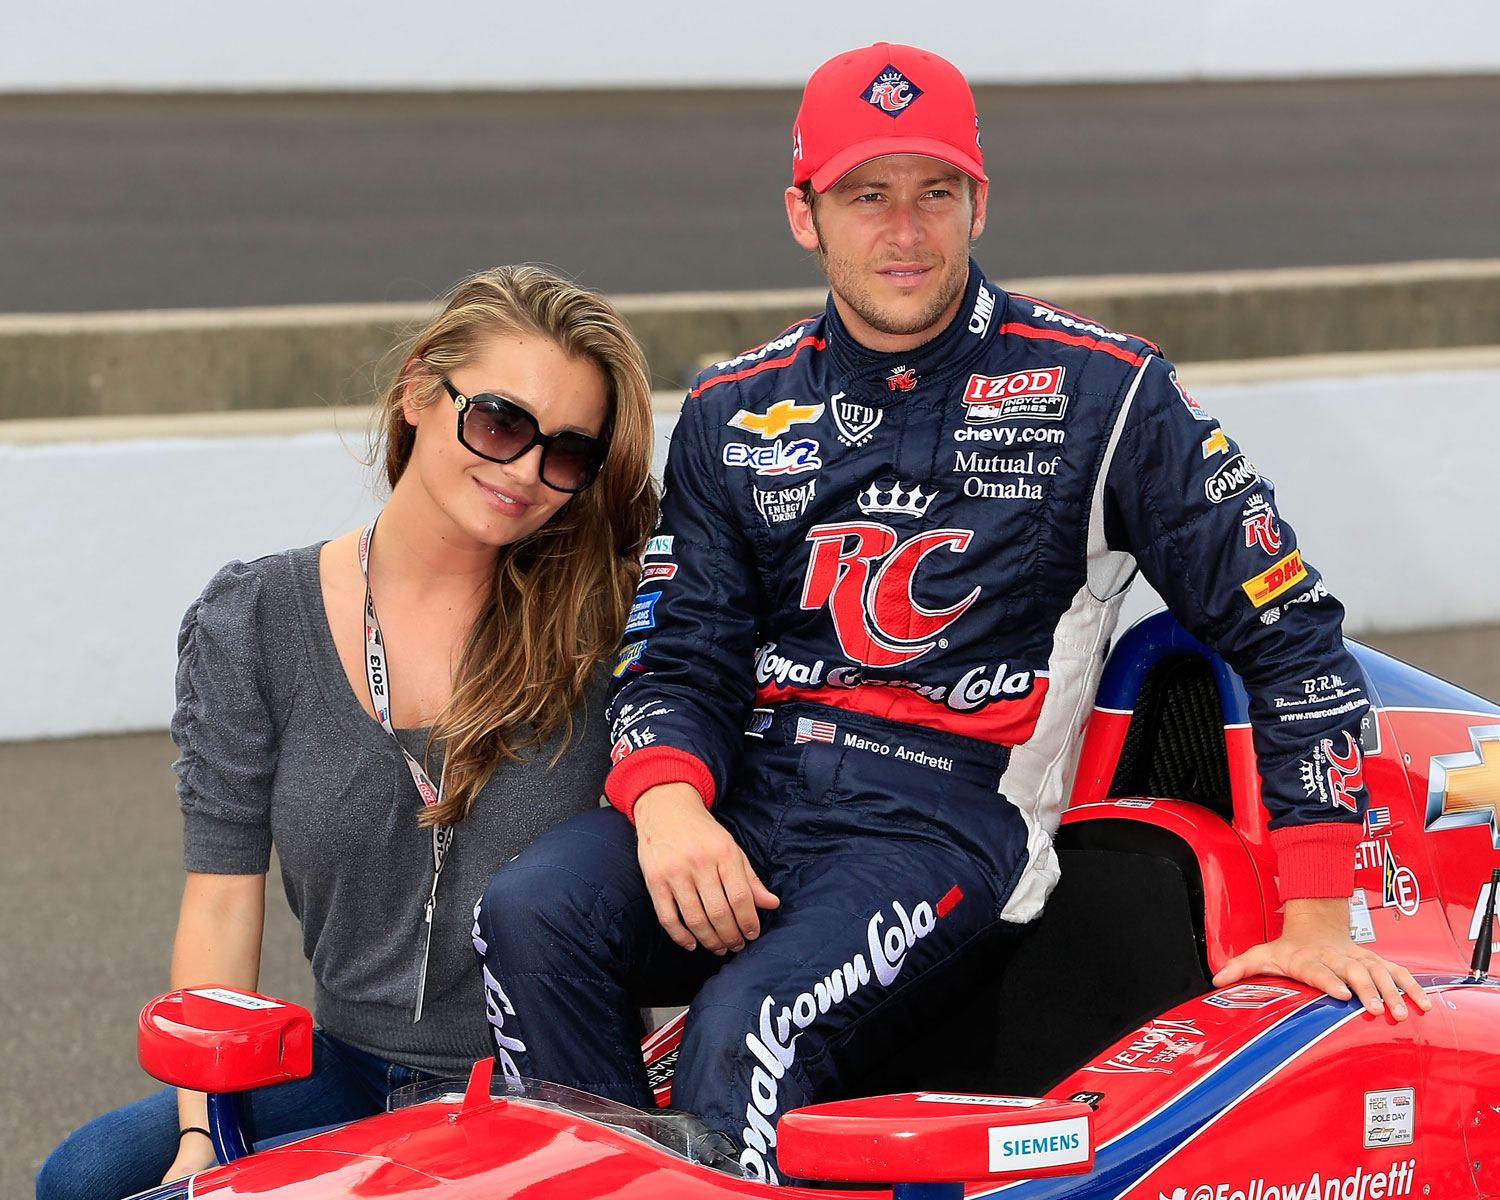 Find out about Marco Andretti: Sister, Children, Mother, Affair, Salary, So...